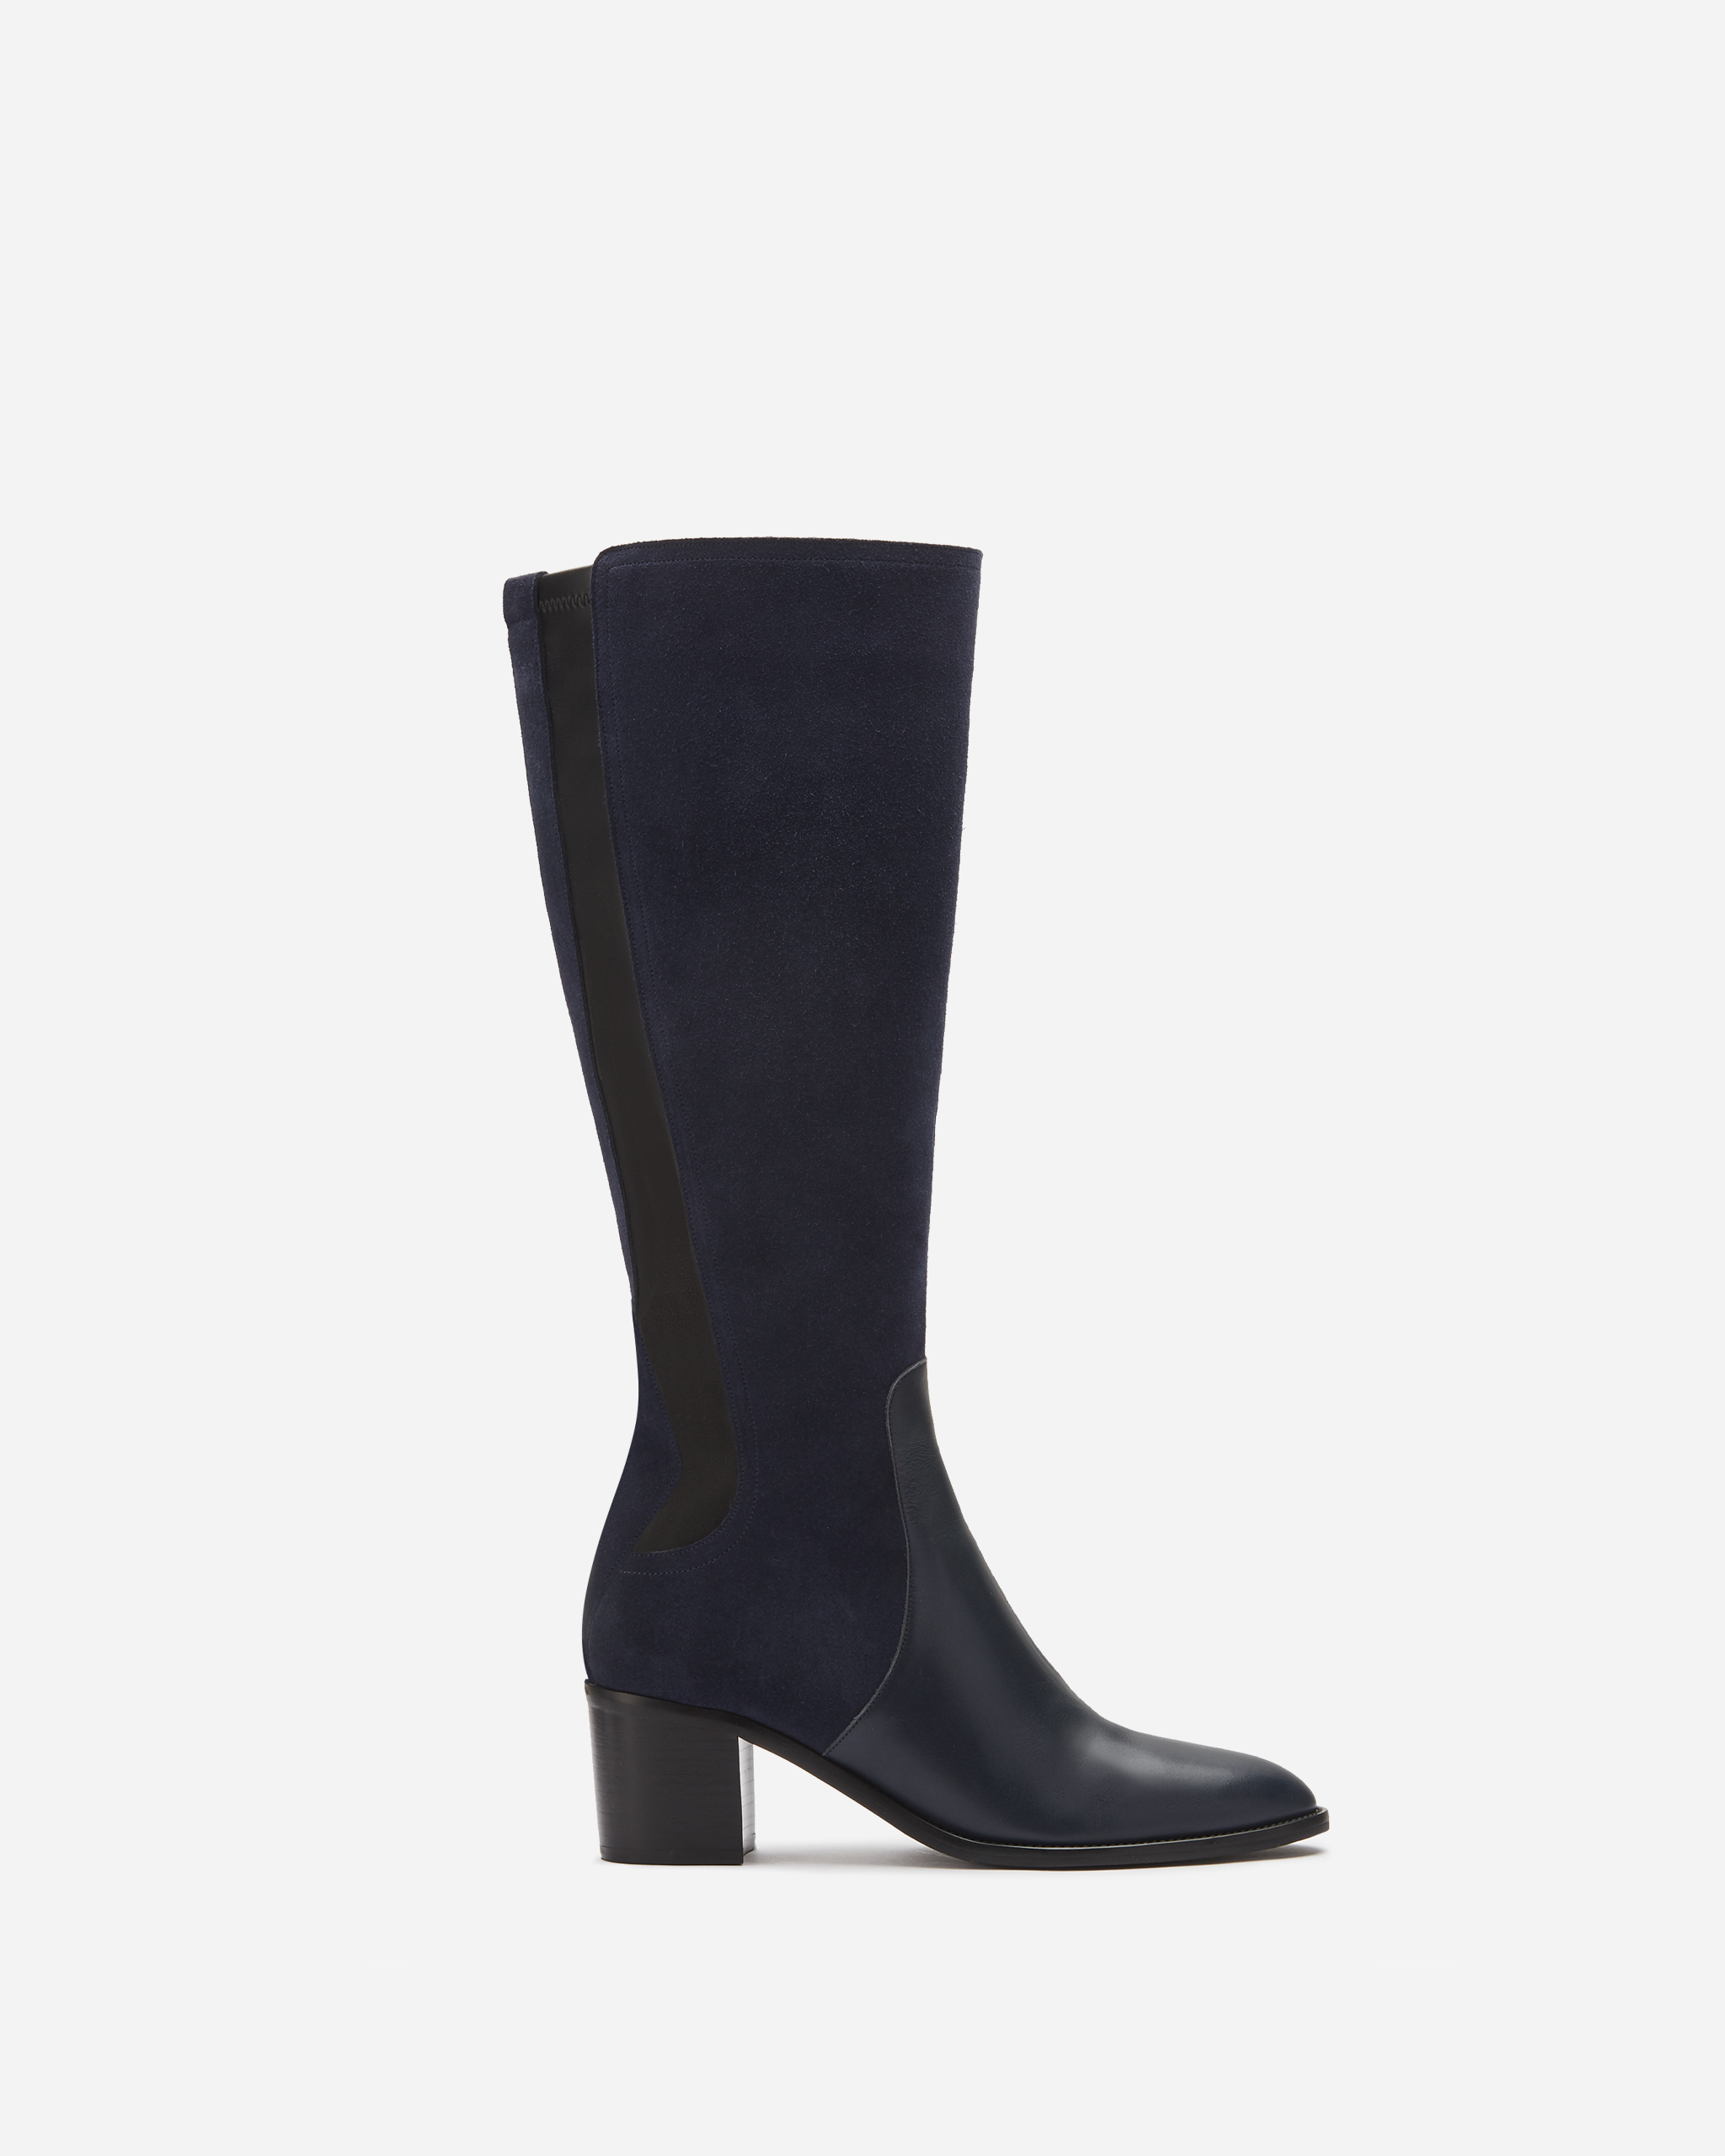 Knee high navy leather boots